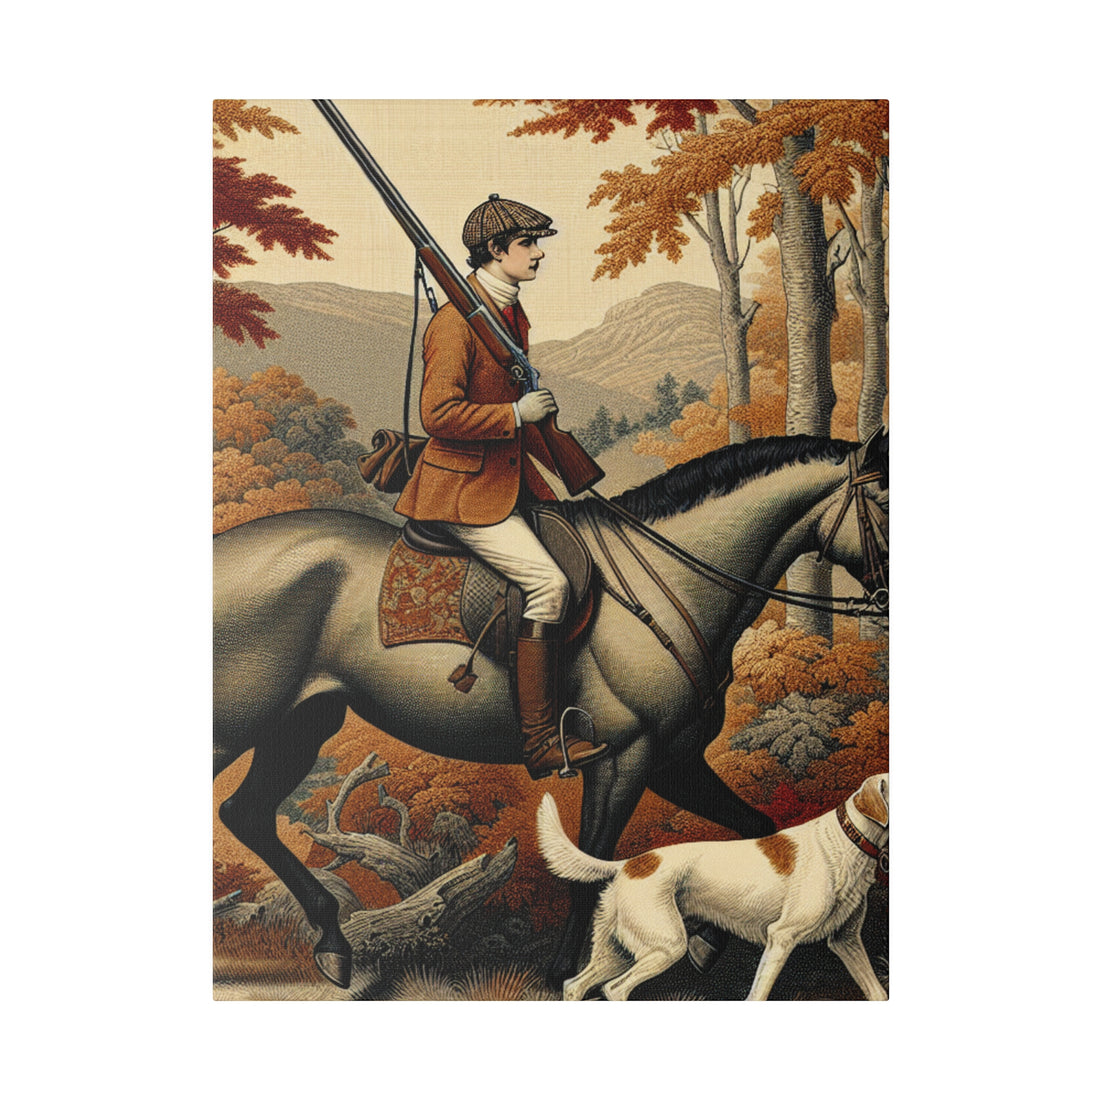 "Wild Pursuits: Hunting Inspired Canvas Wall Art"